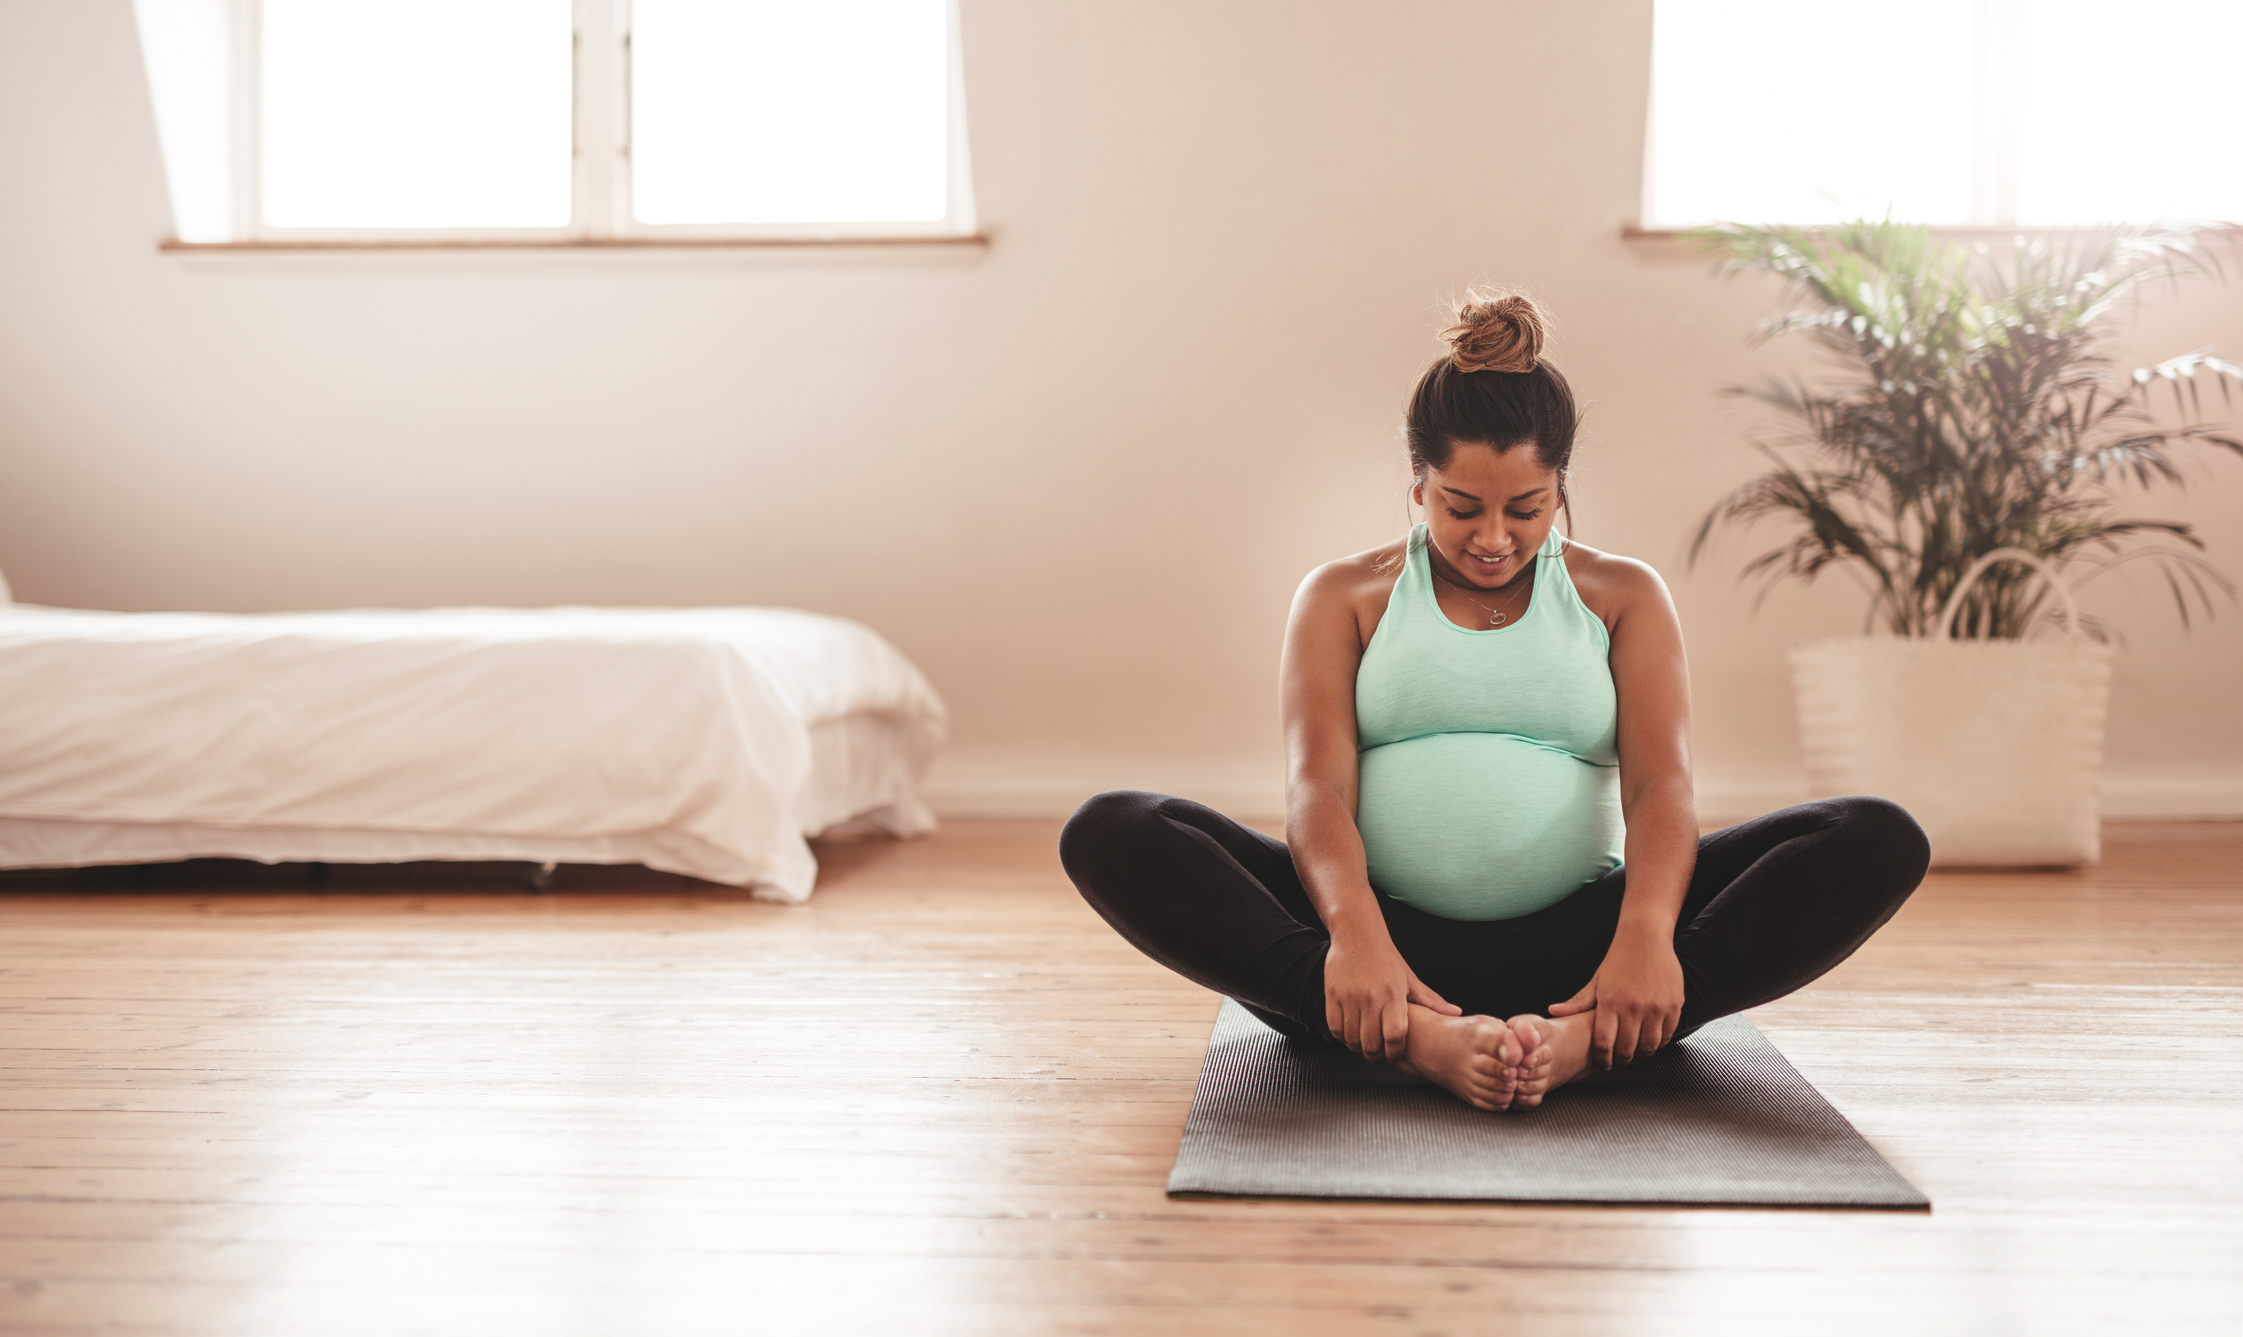 11 Best Pregnancy Stretches To Relieve Aches From A Prenatal Trainer